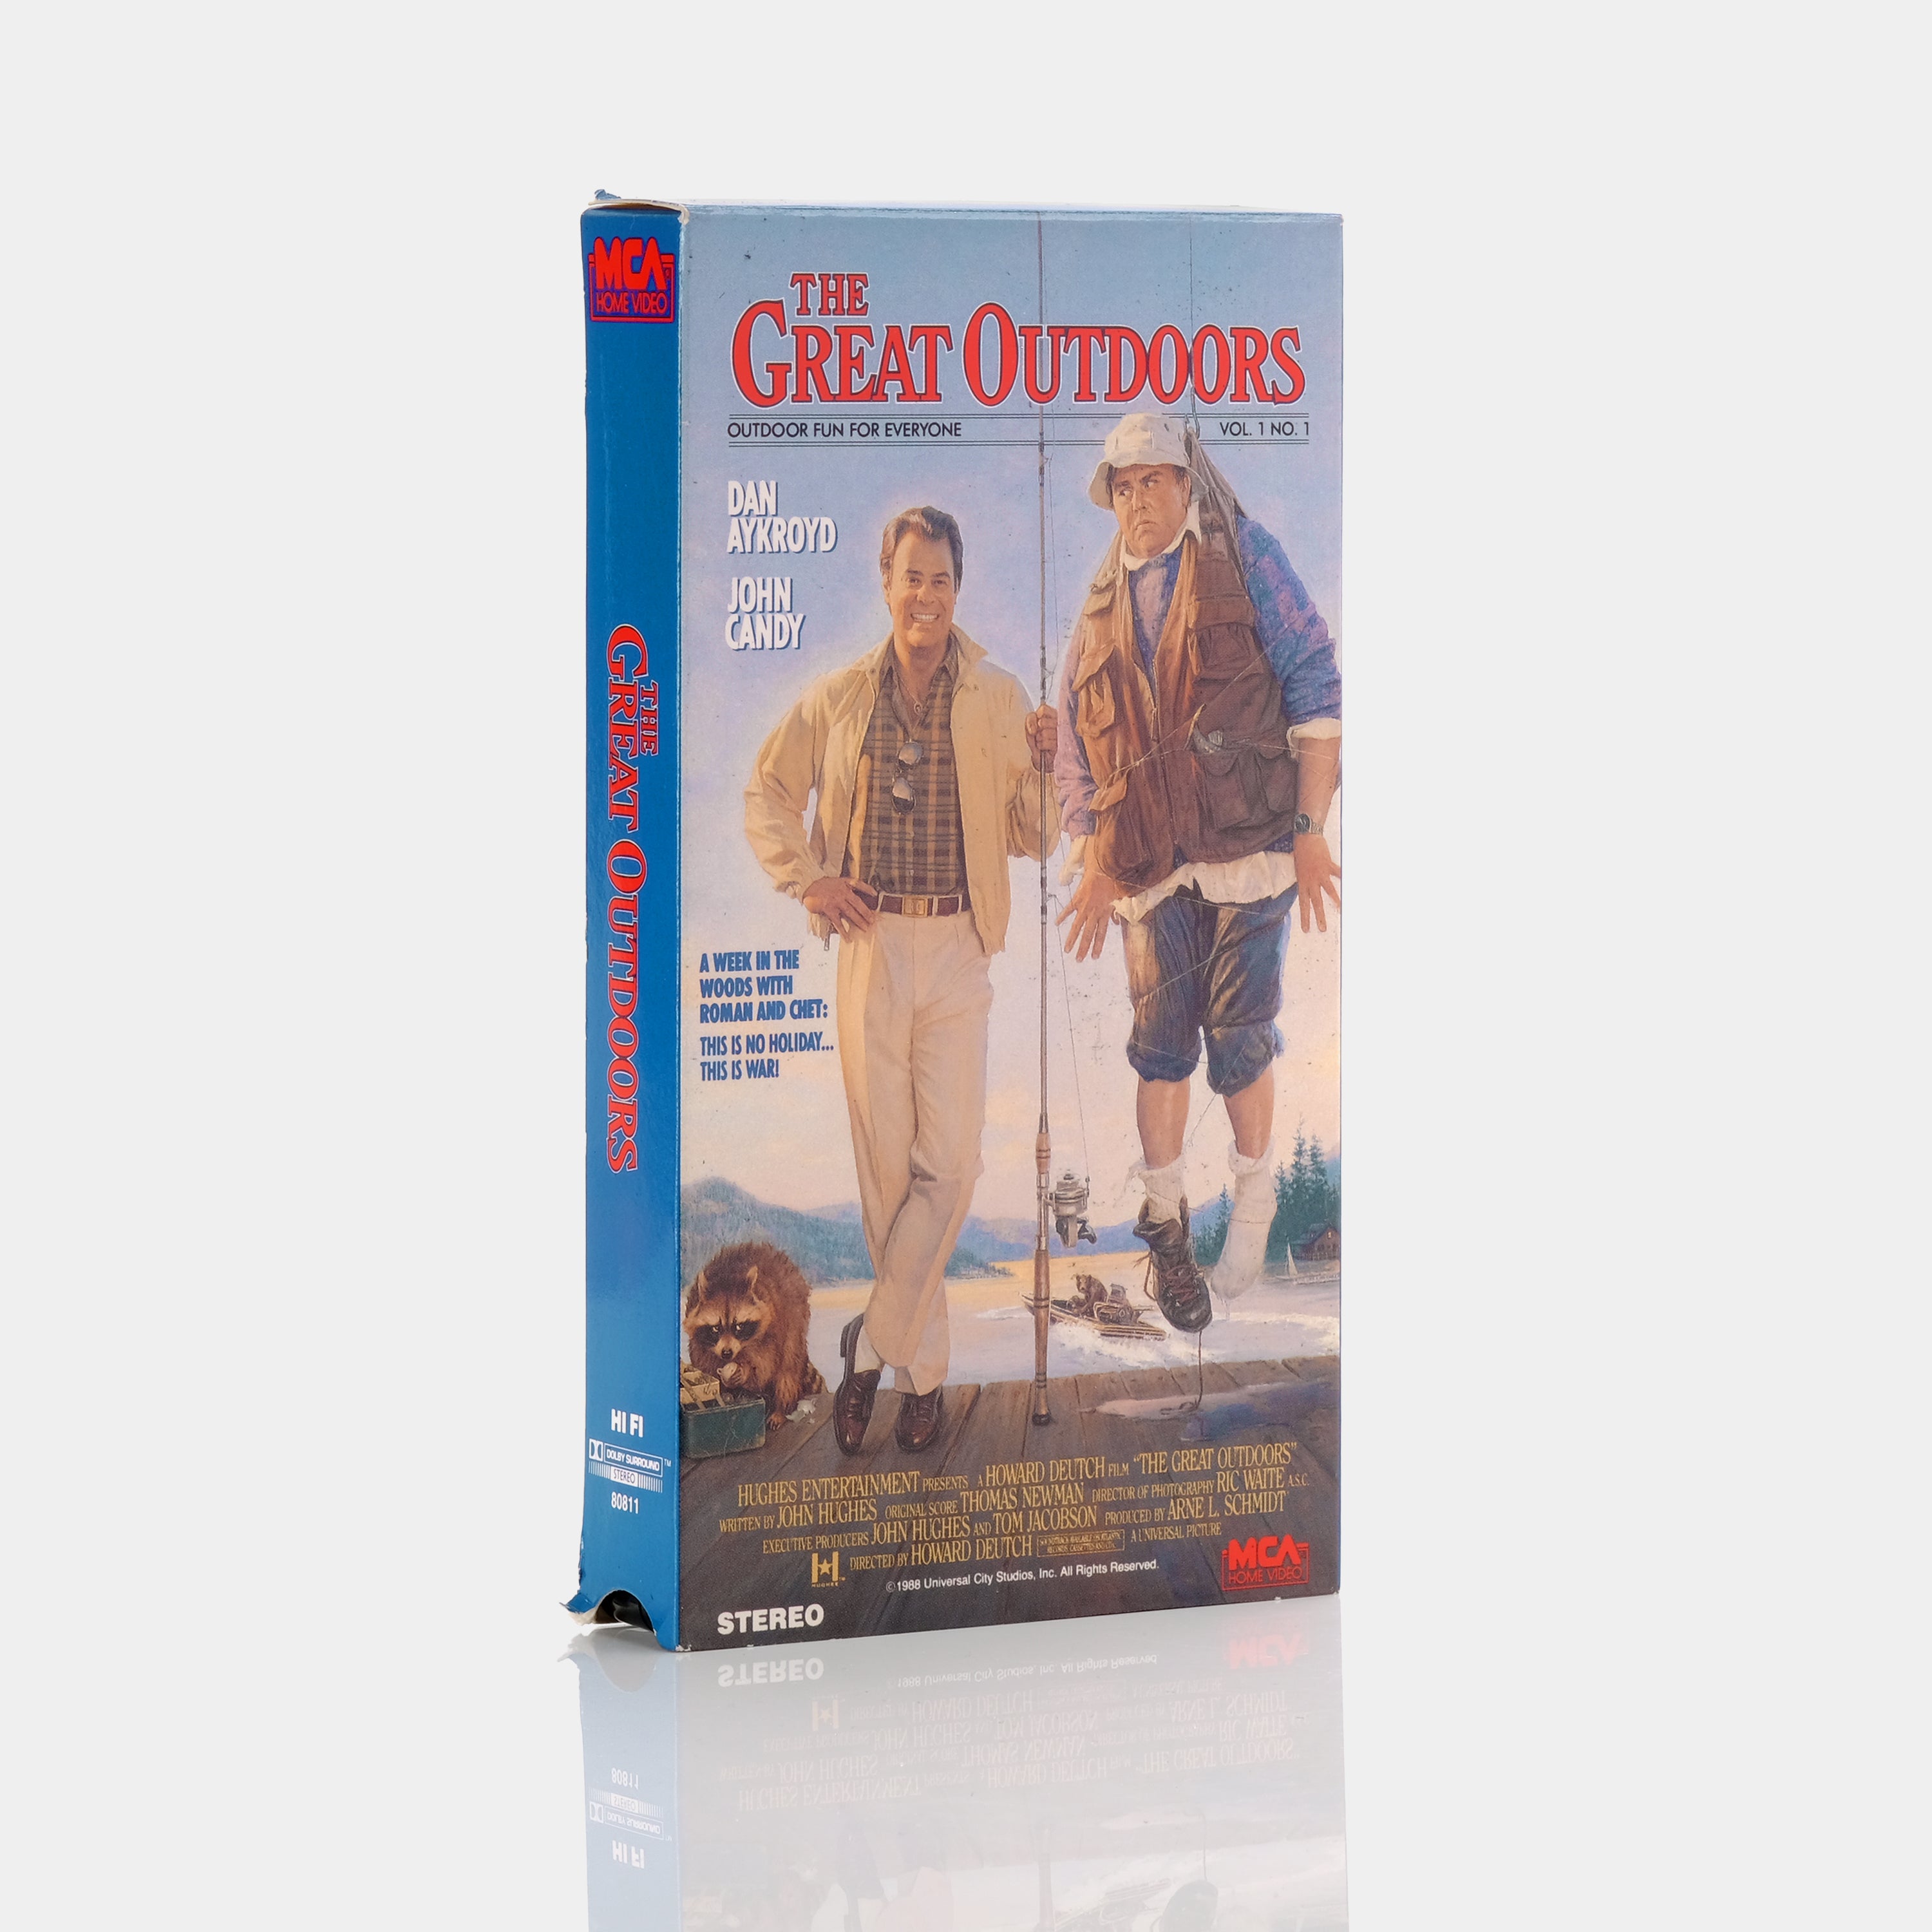 The Great Outdoors VHS Tape